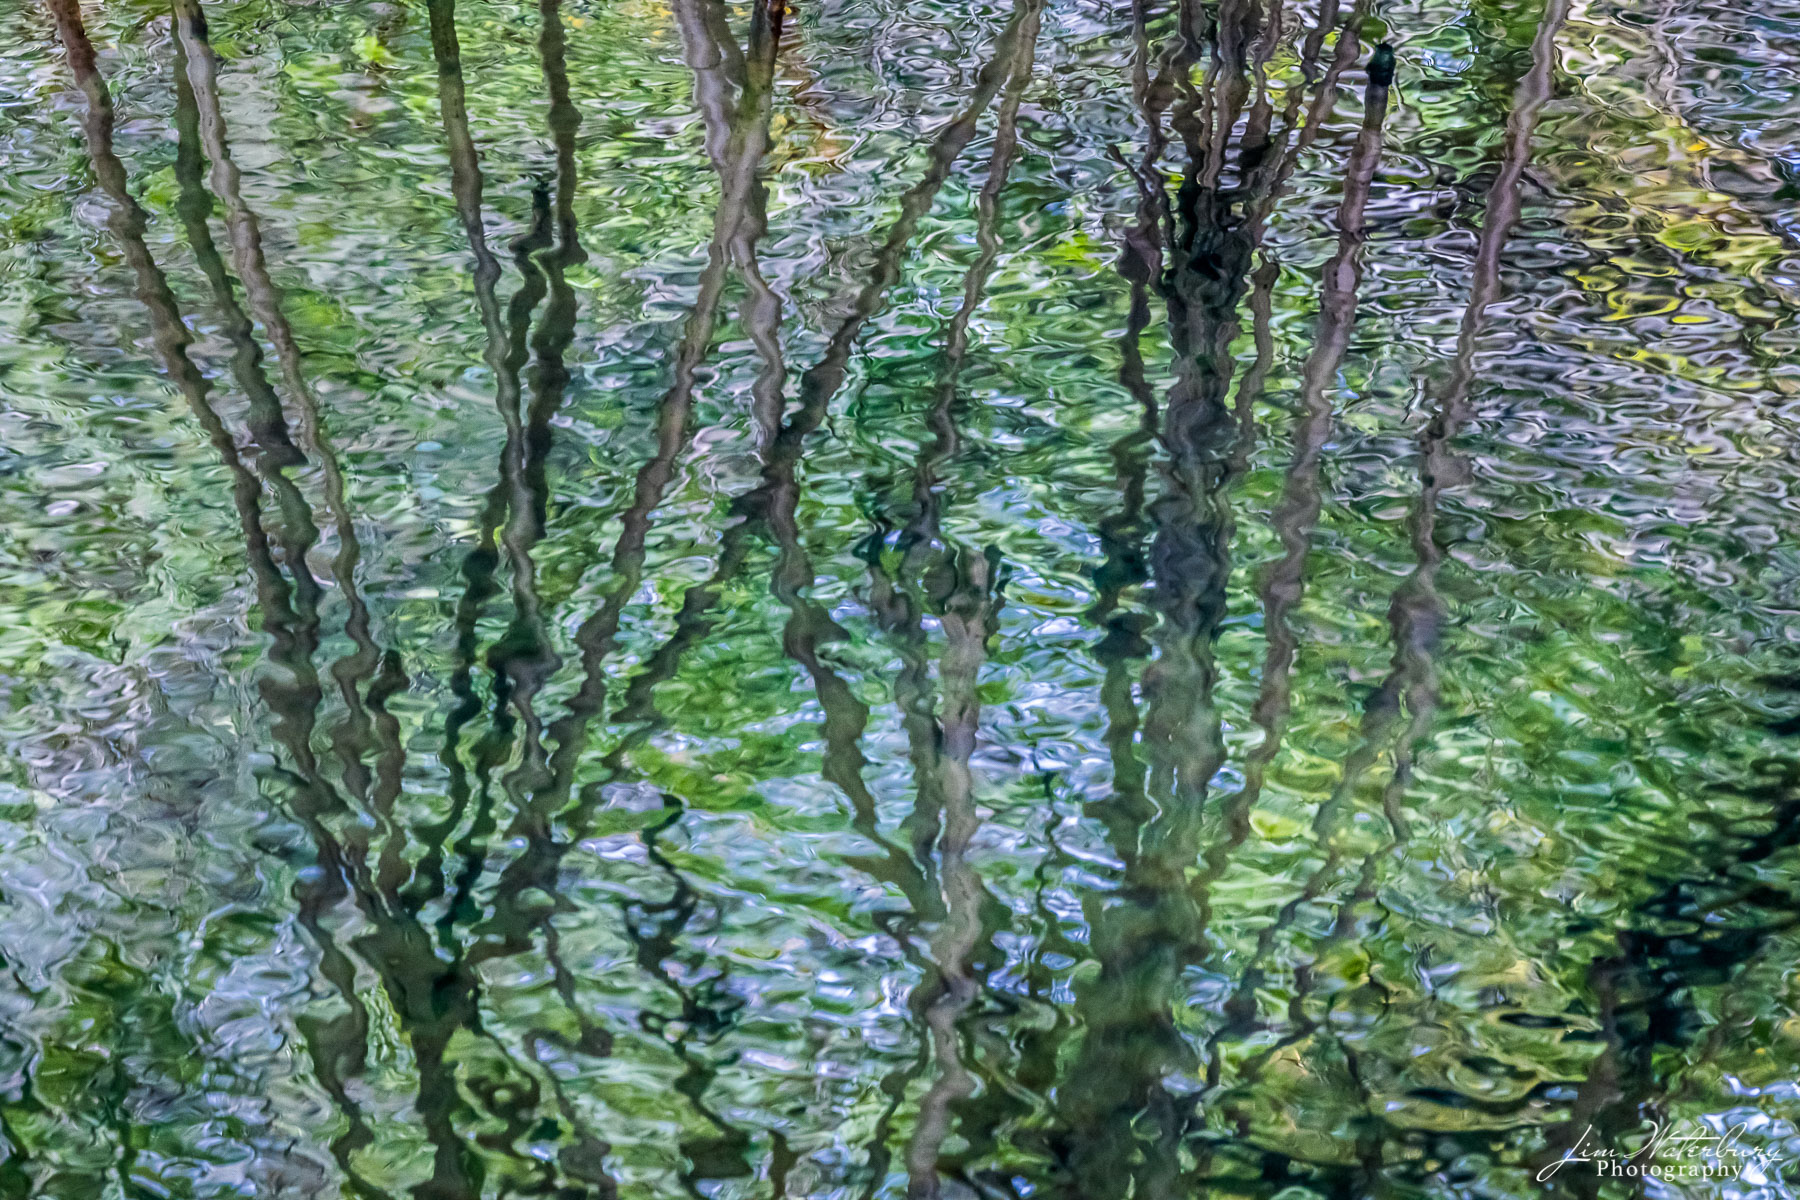 Reflection of tree branches and foliage in a pond in Hilo, Hawaii.